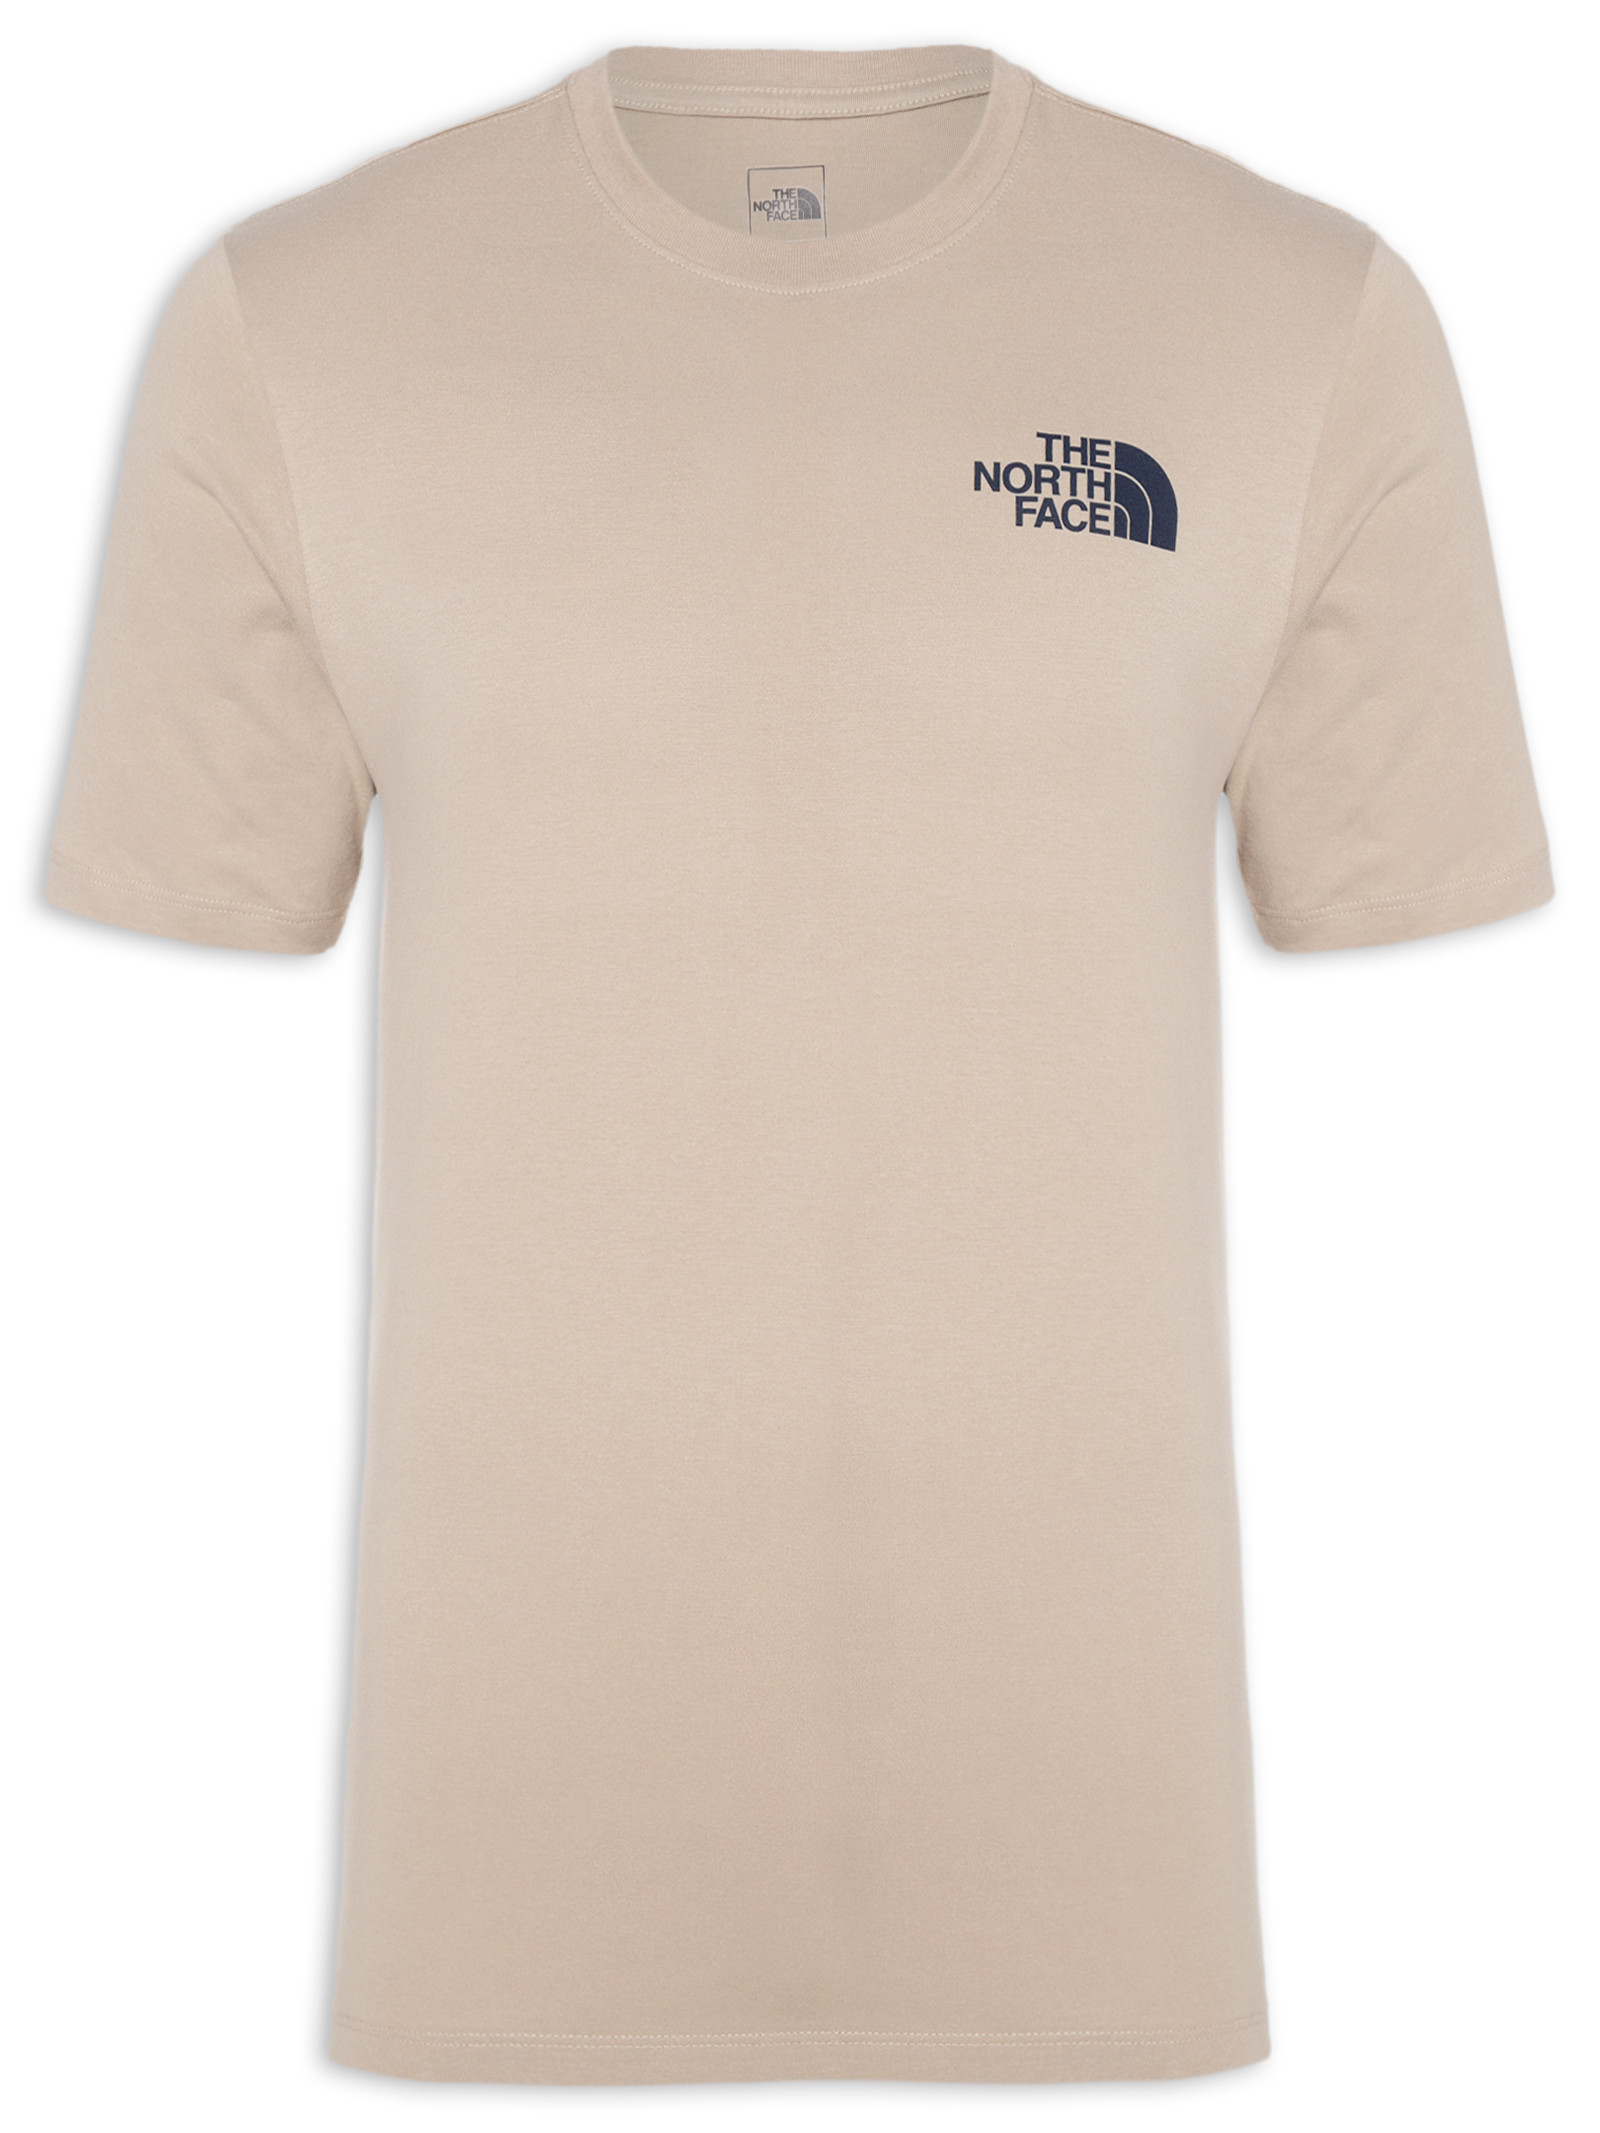 T-shirt Masculina Altitude Problem - The North Face - Bege